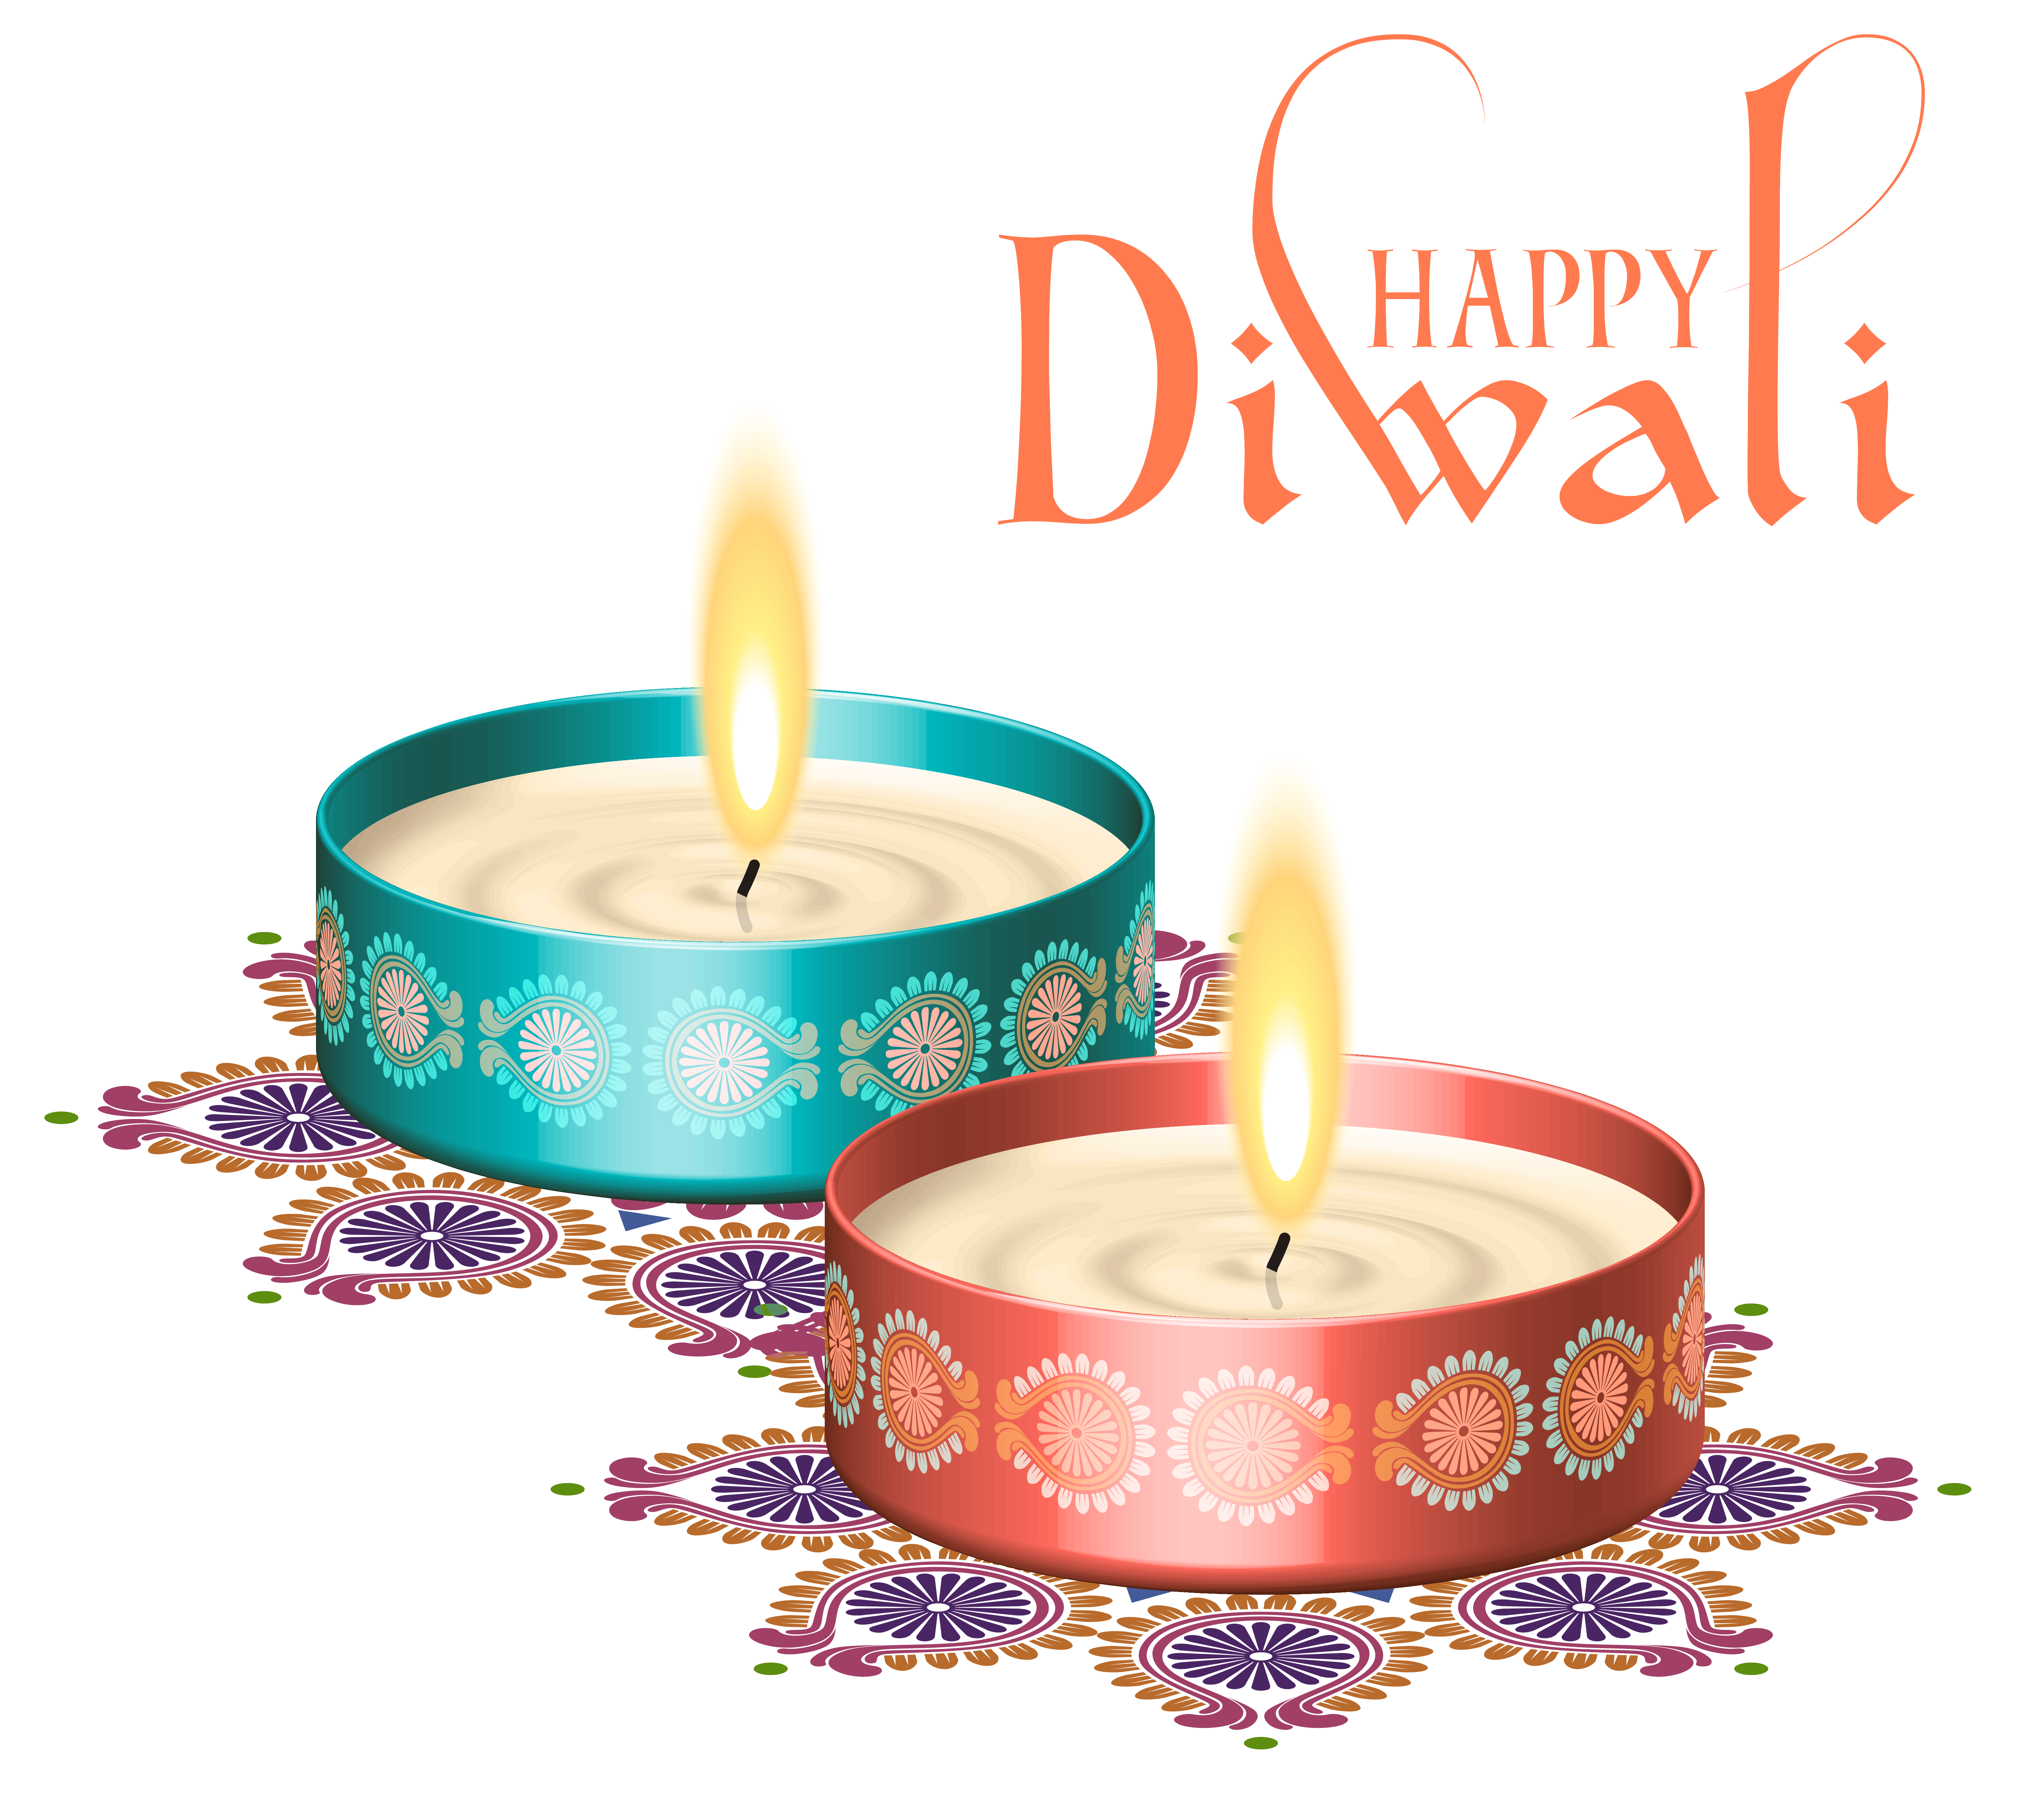 2017 clipart diwali. Happy nice candles png